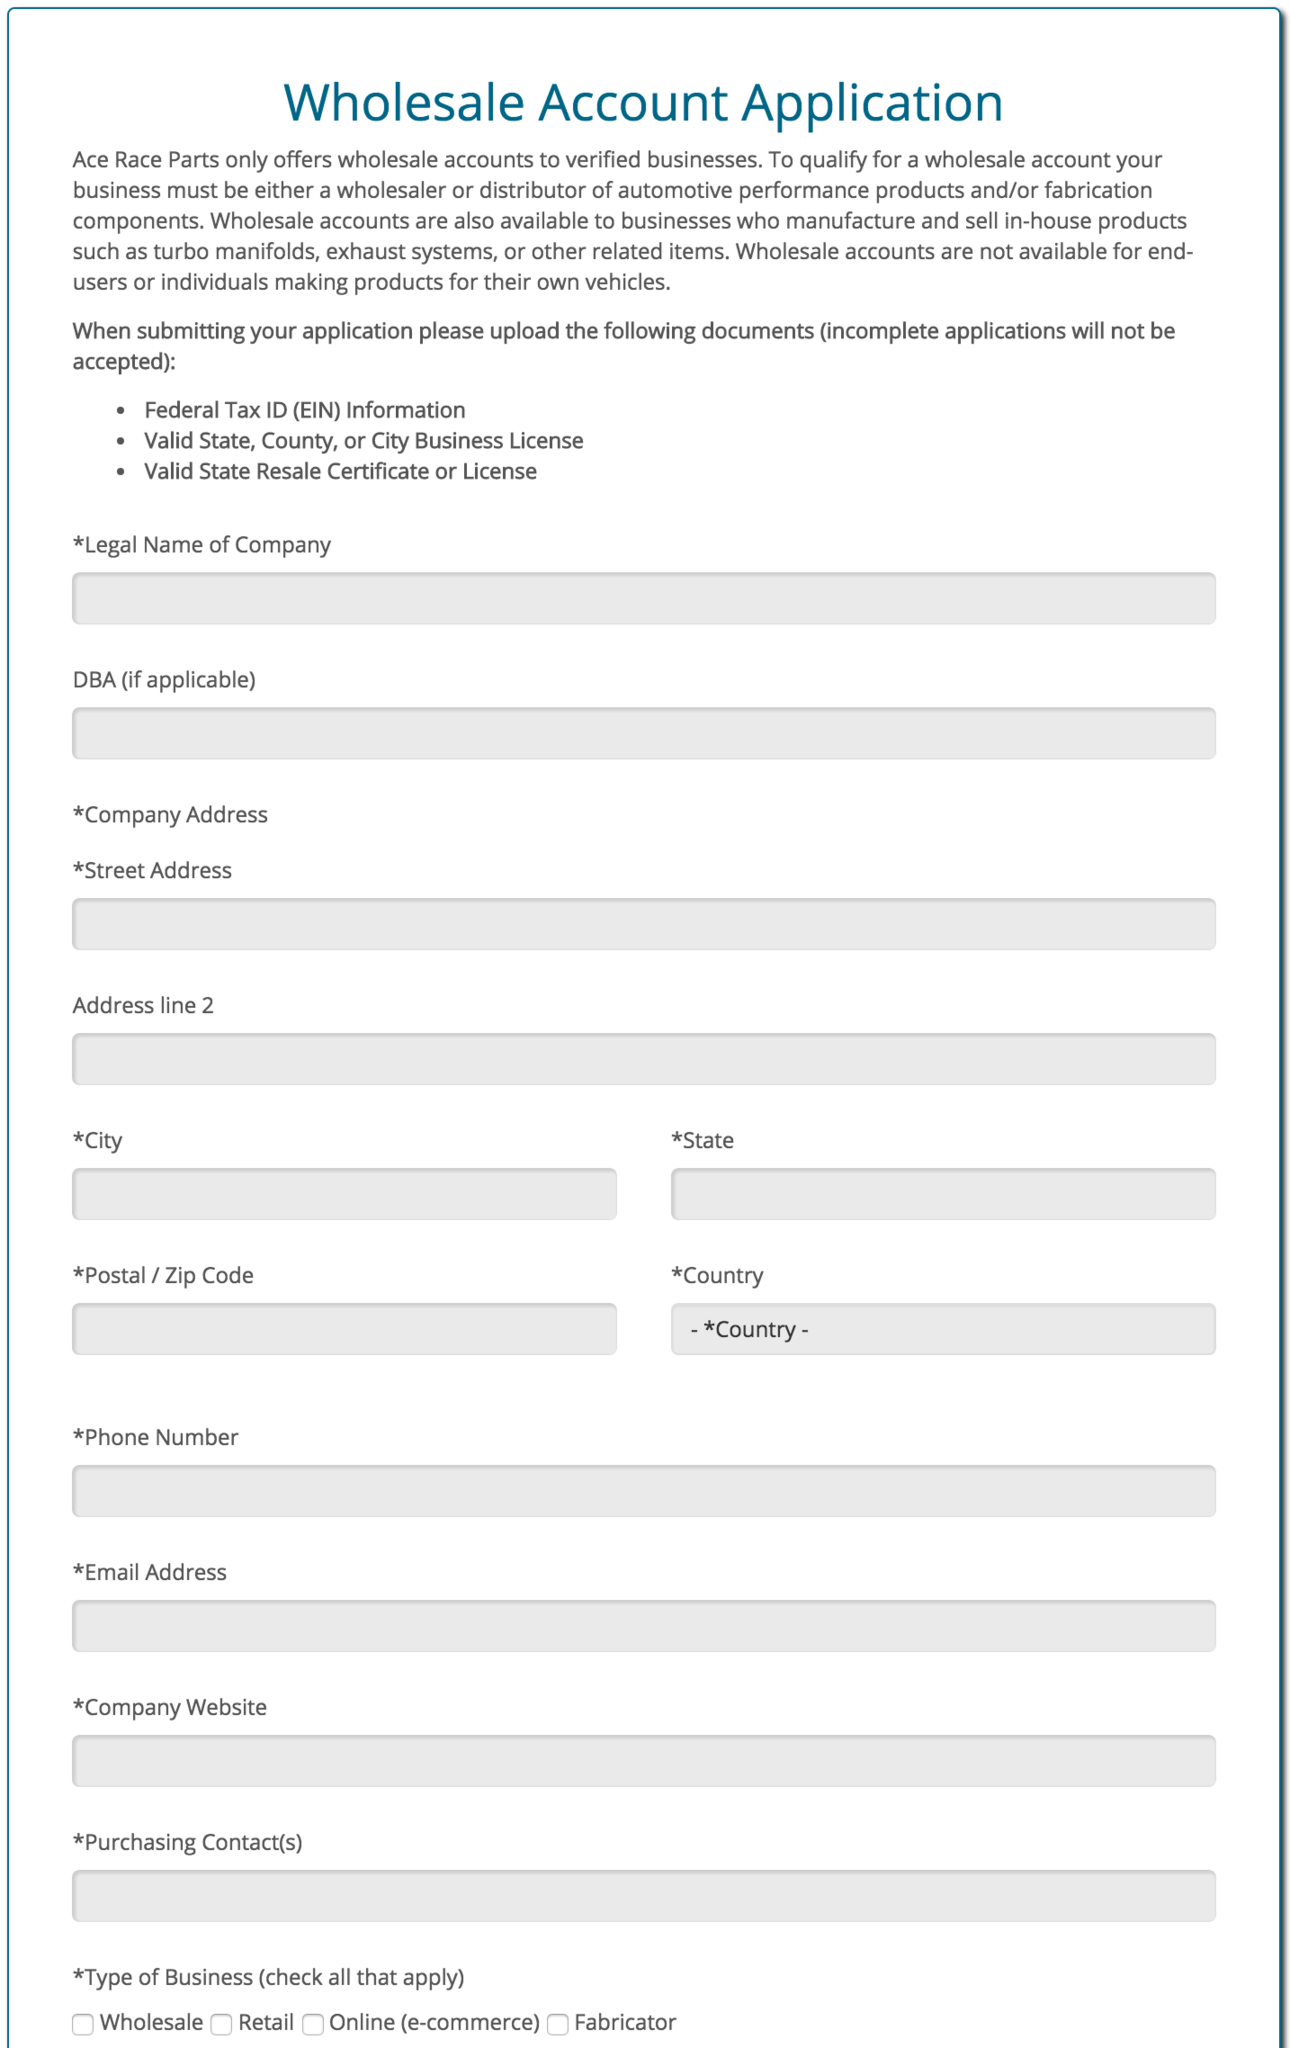 Our New Wholesale Account Application